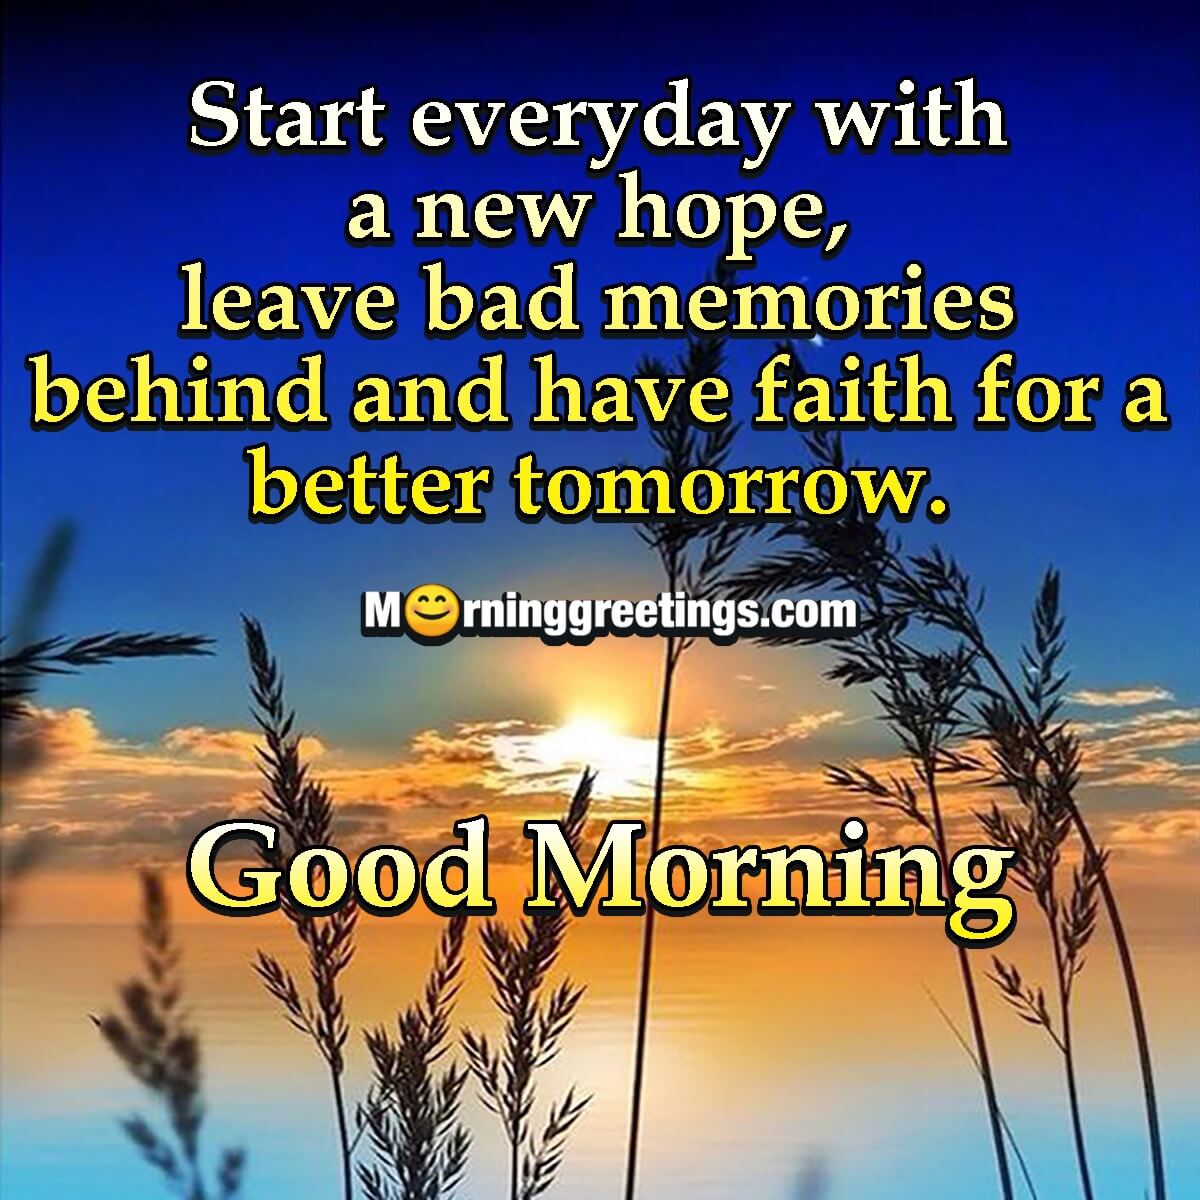 Good Morning Start Everyday With New Hope